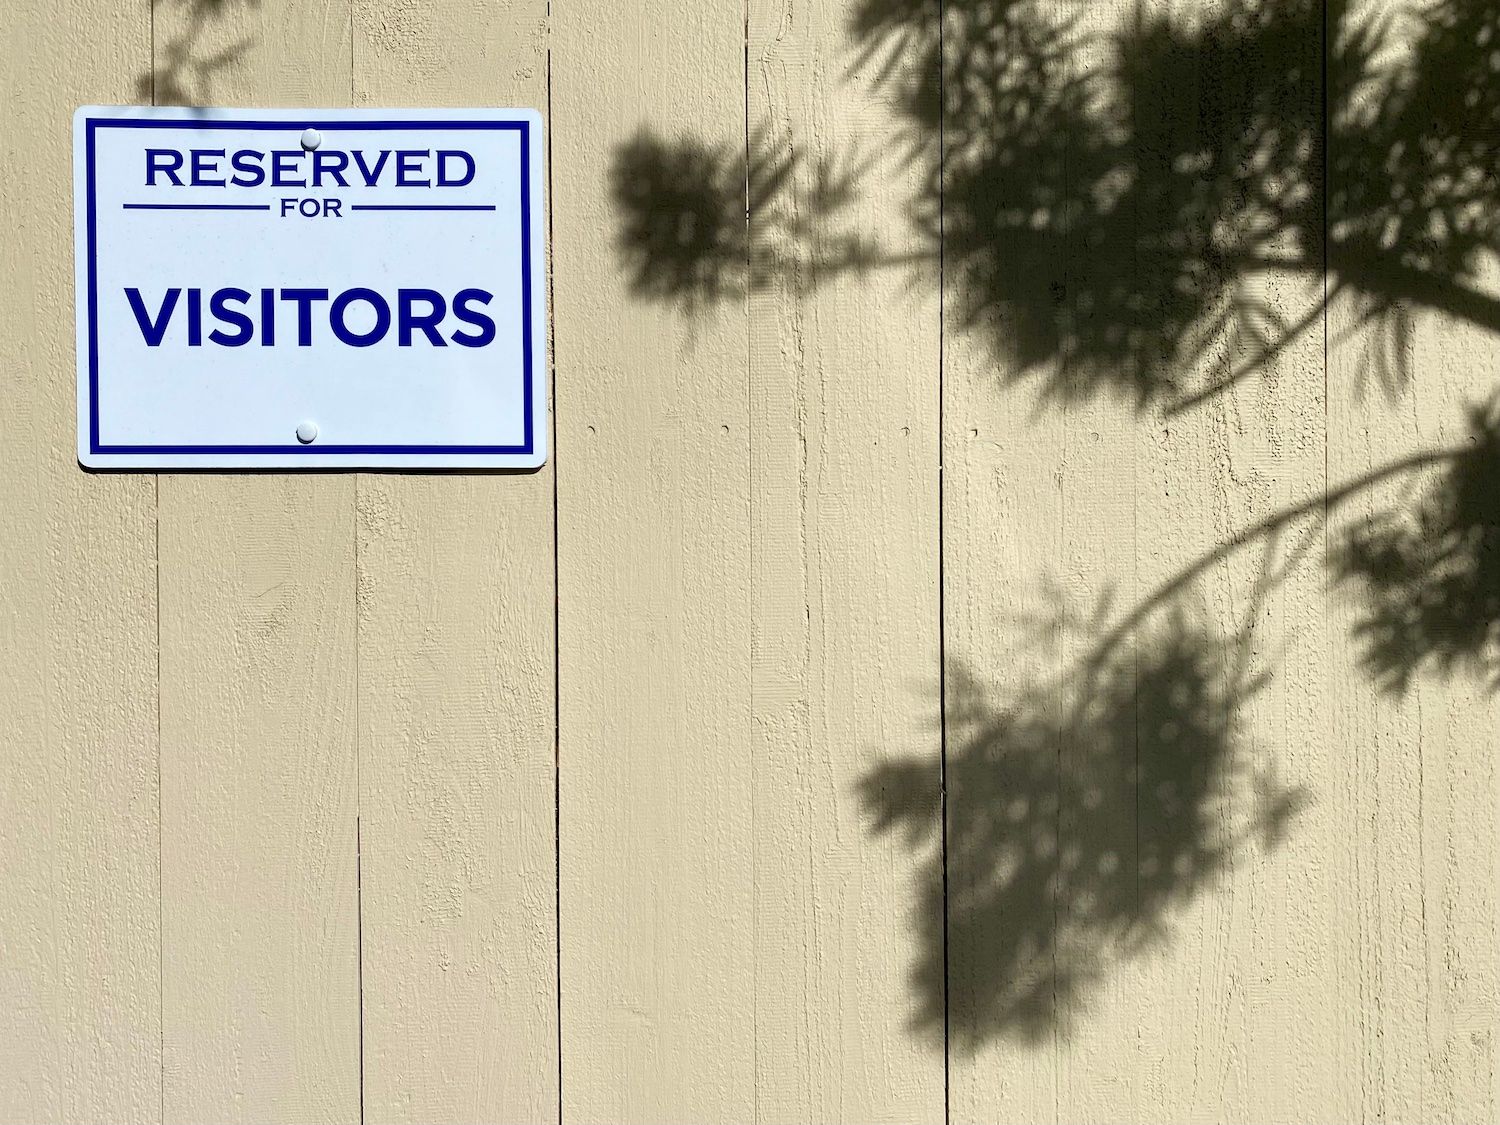 The shadow of a tree on a beige wooden fence, next to a white plastic sign with blue lettering that reads "RESERVED FOR VISITOR"